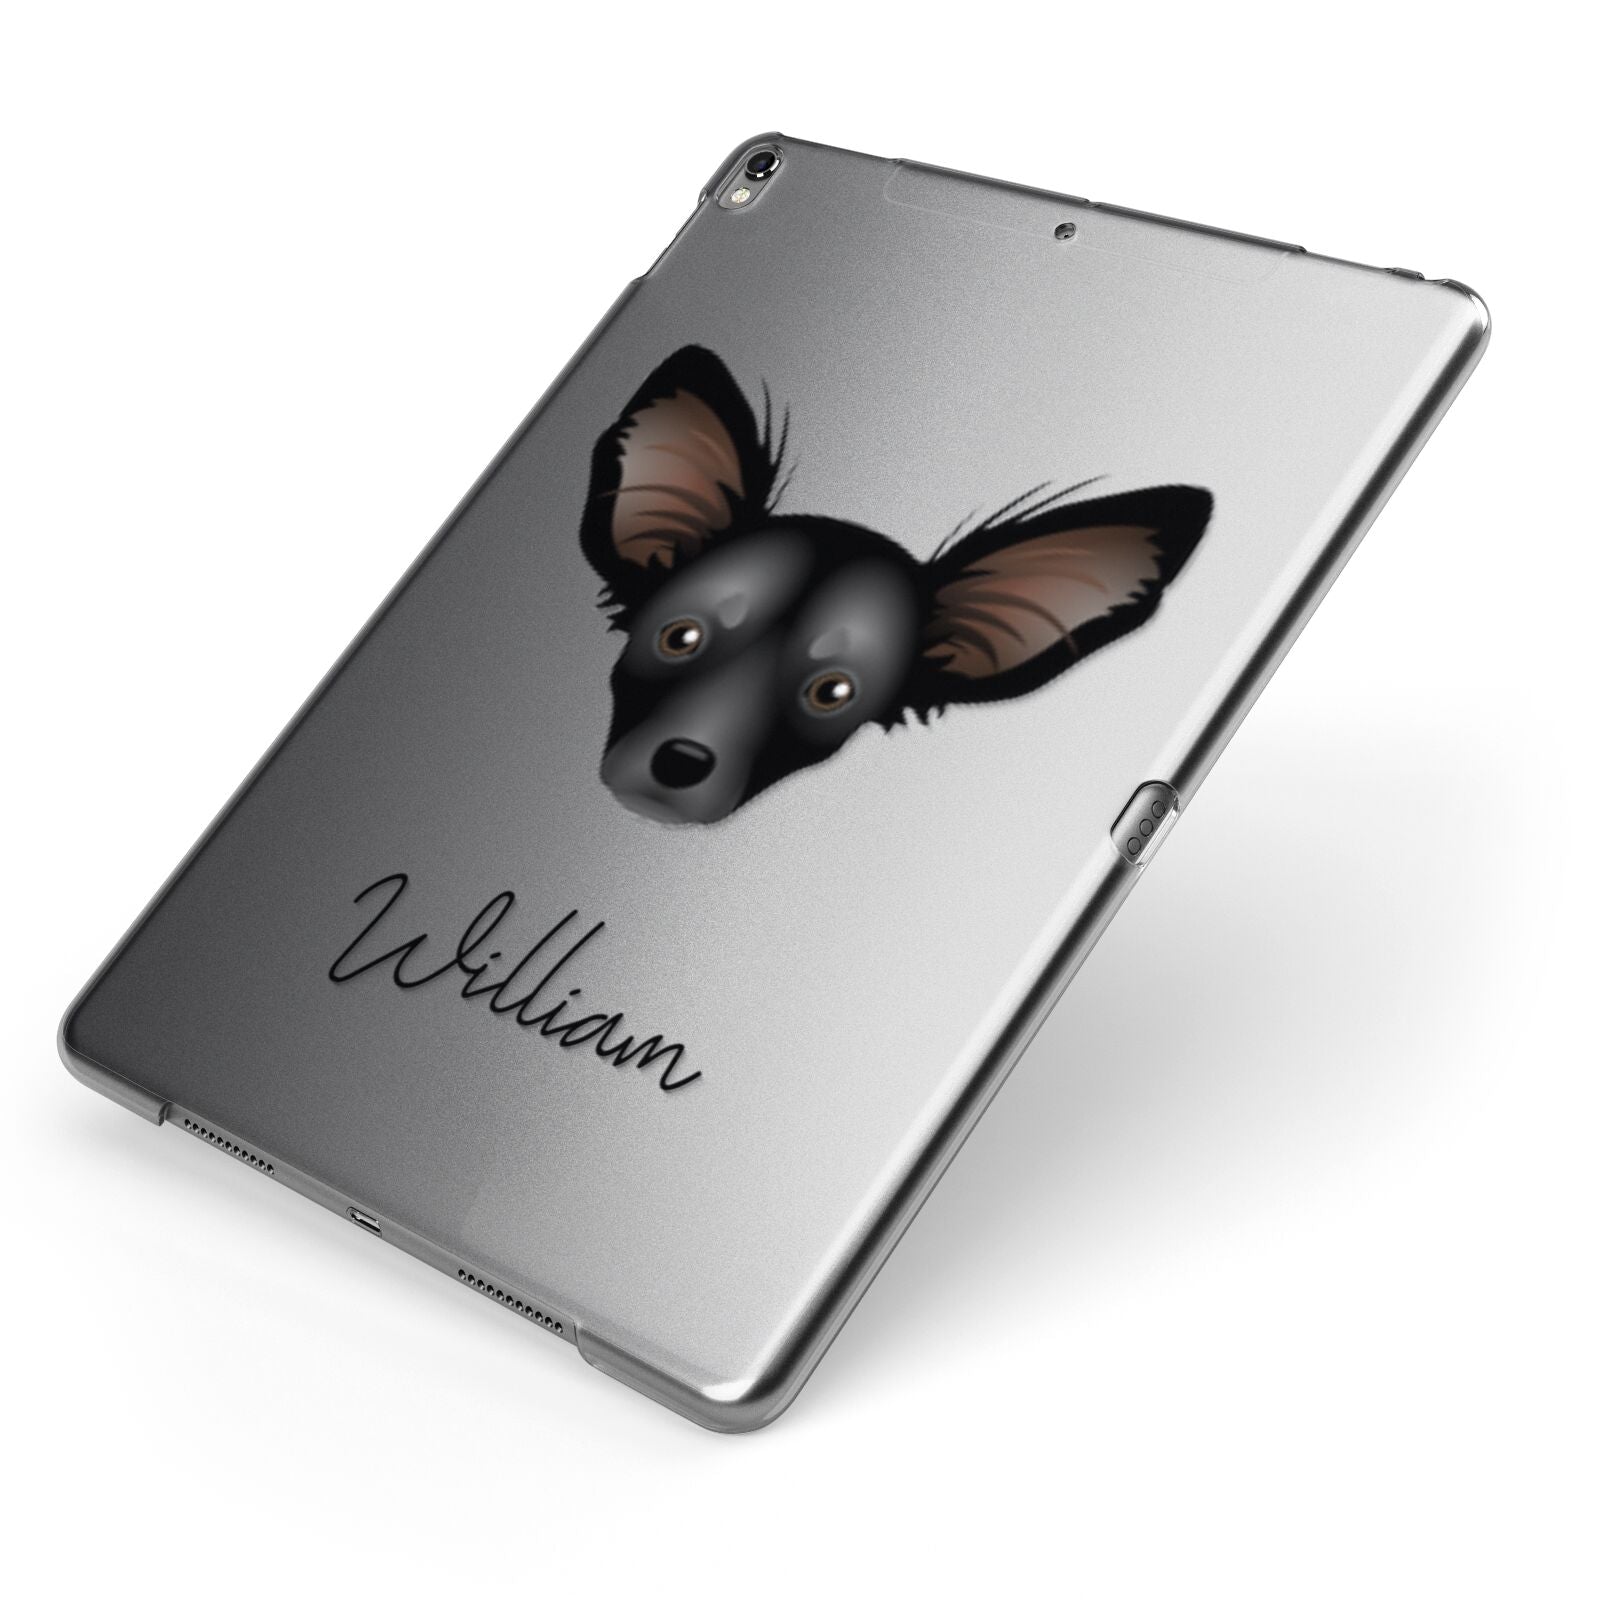 Russian Toy Personalised Apple iPad Case on Grey iPad Side View